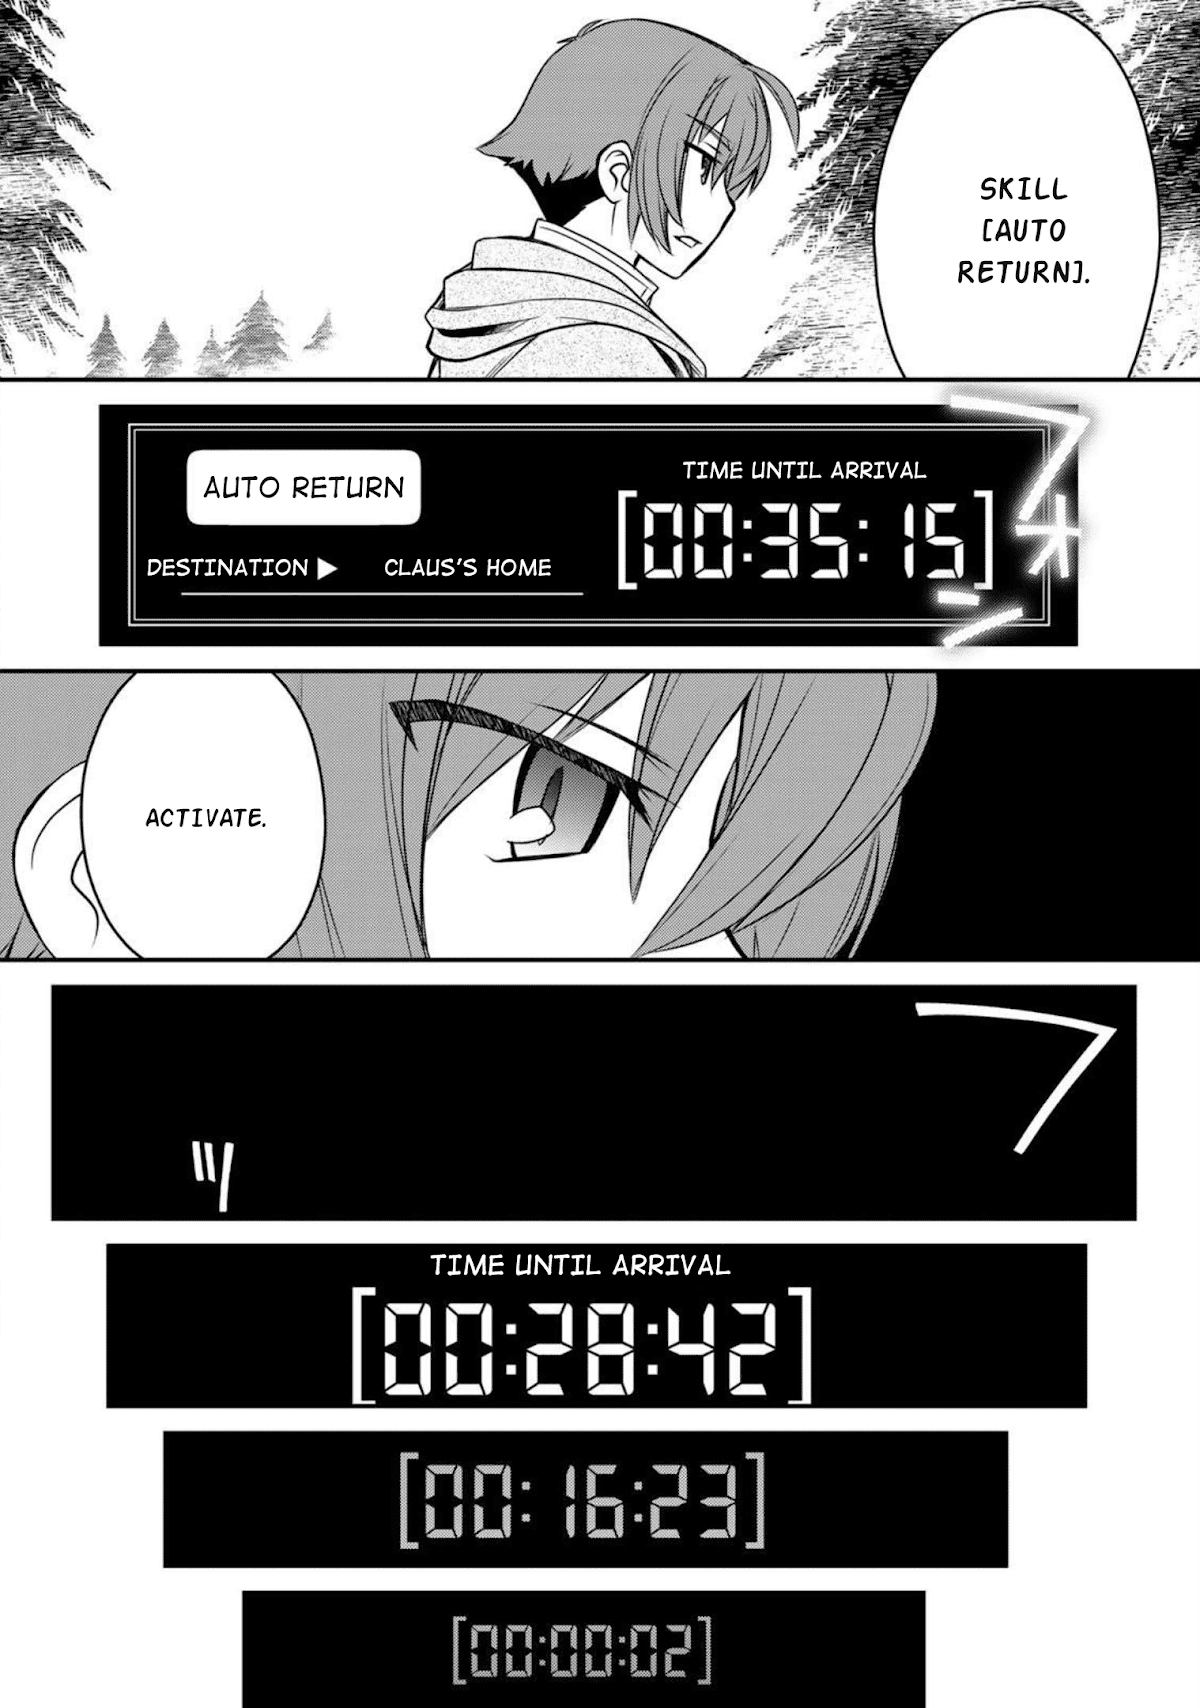 The Useless Skill [Auto Mode] Has Been Awakened ~Huh, Guild's Scout, Didn't You Say I Wasn't Needed Anymore?~ chapter 1 - page 21